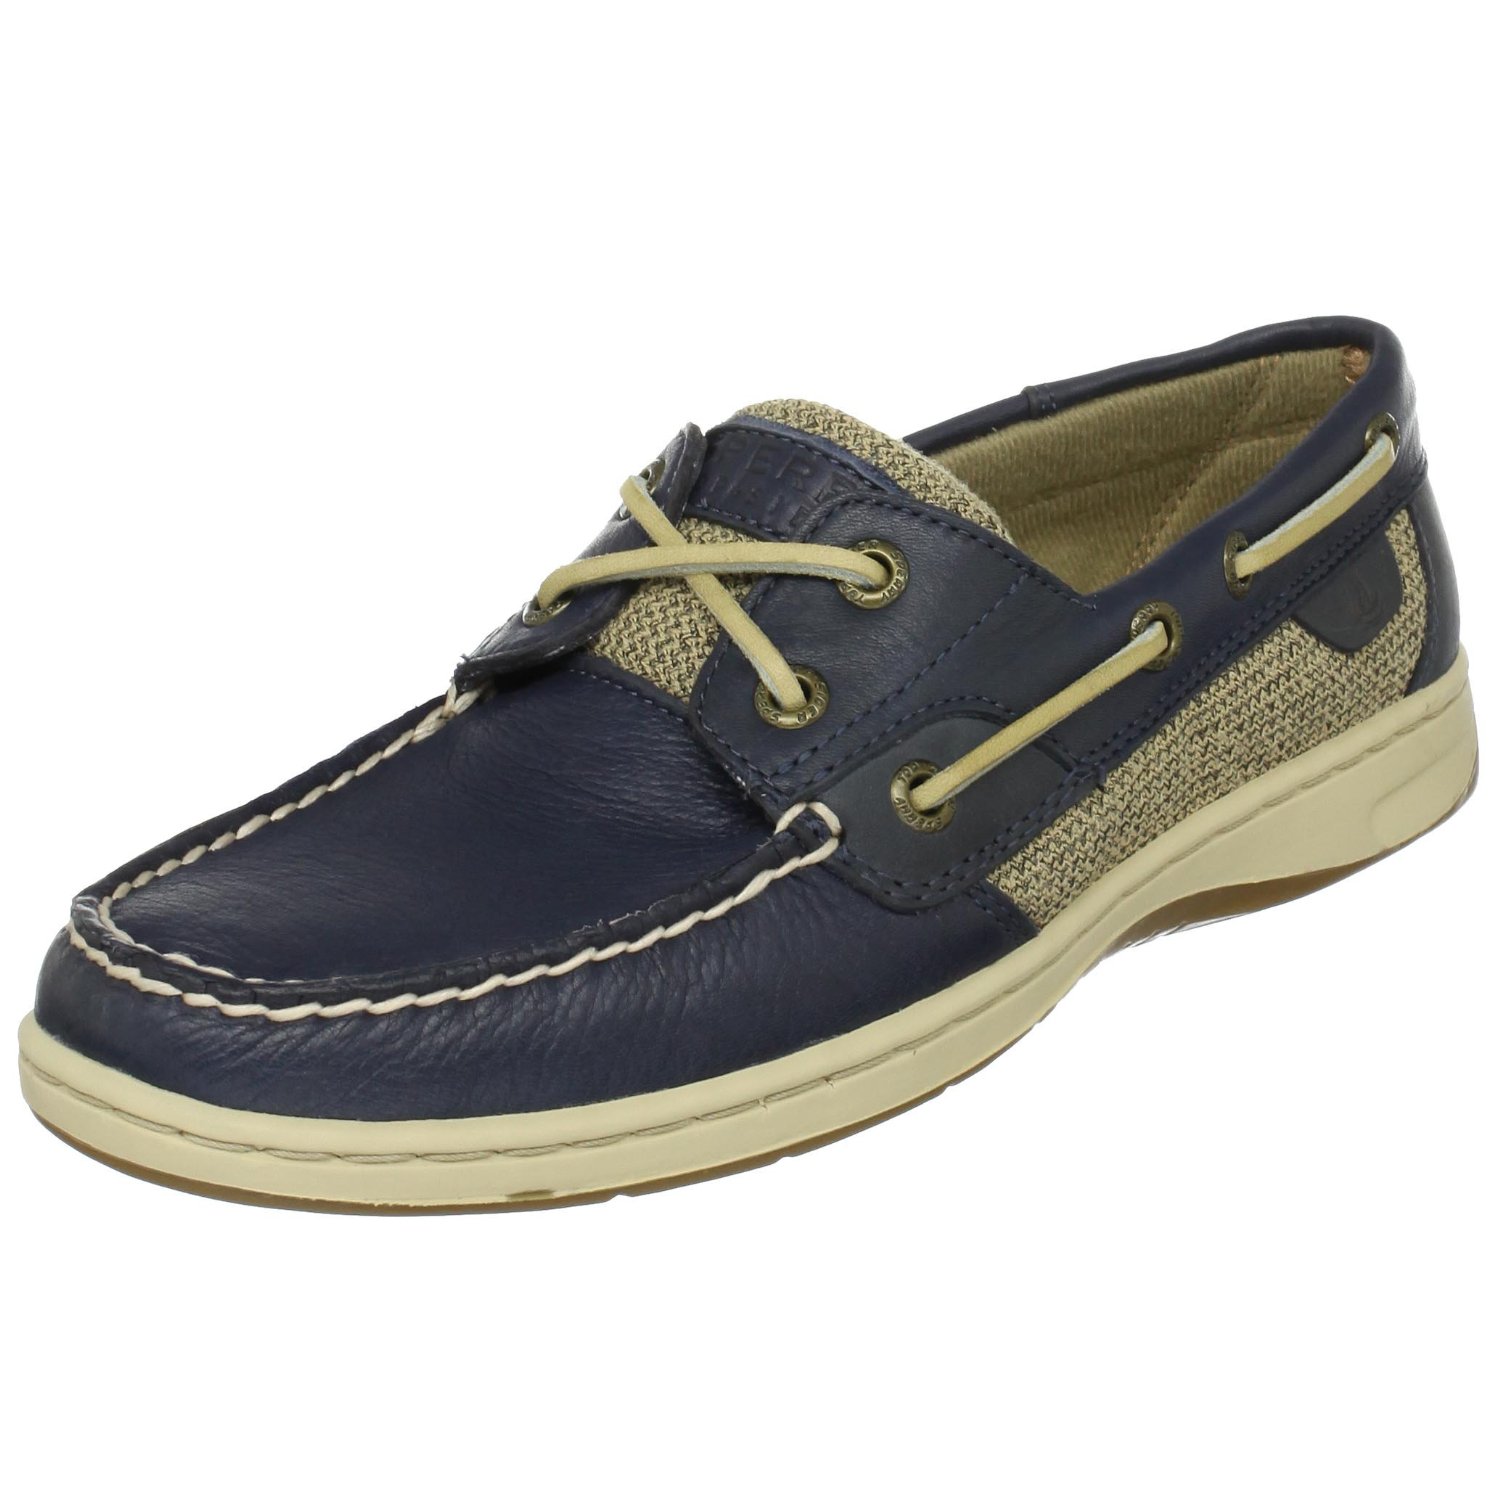 Sperry Top-sider Sperry Topsider Womens Bluefish Boat Shoe in Blue ...